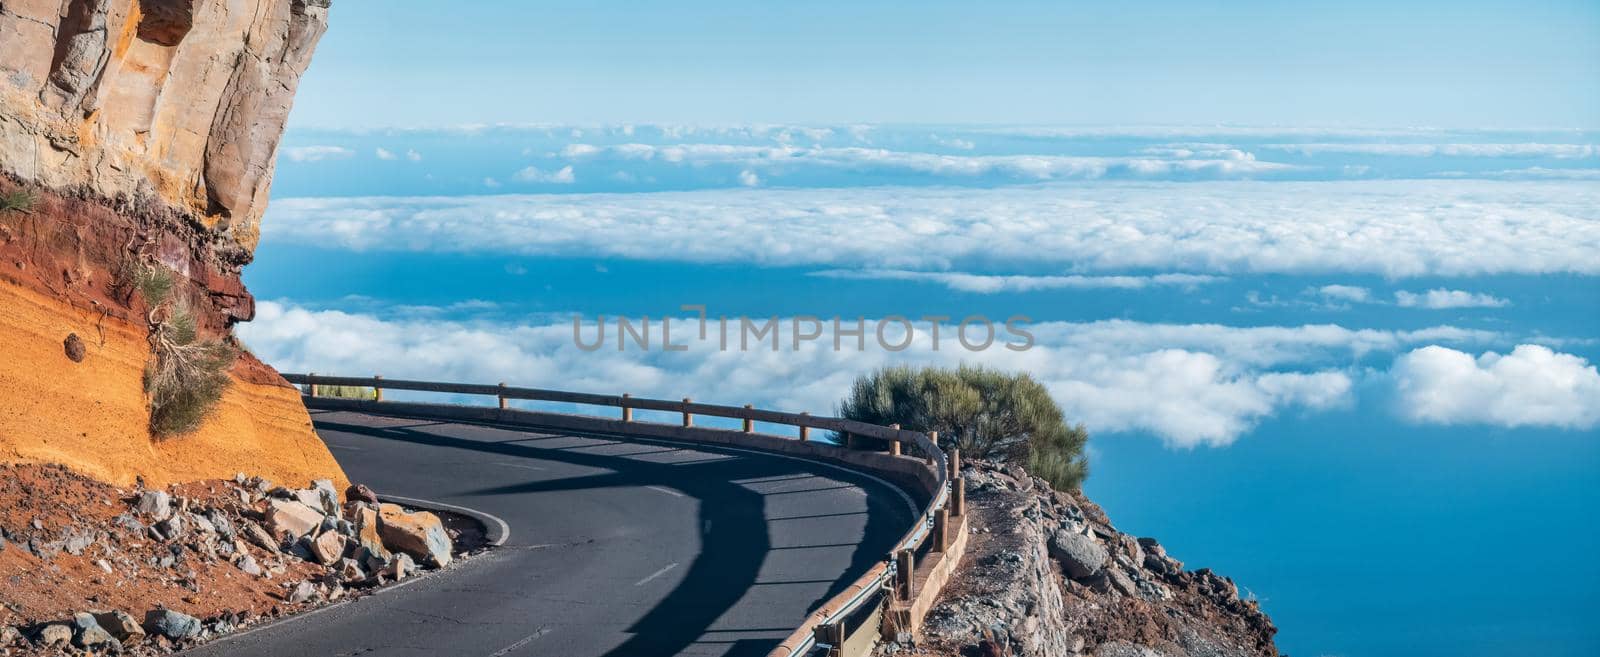 Spectacular high mountain road over the clouds by FerradalFCG